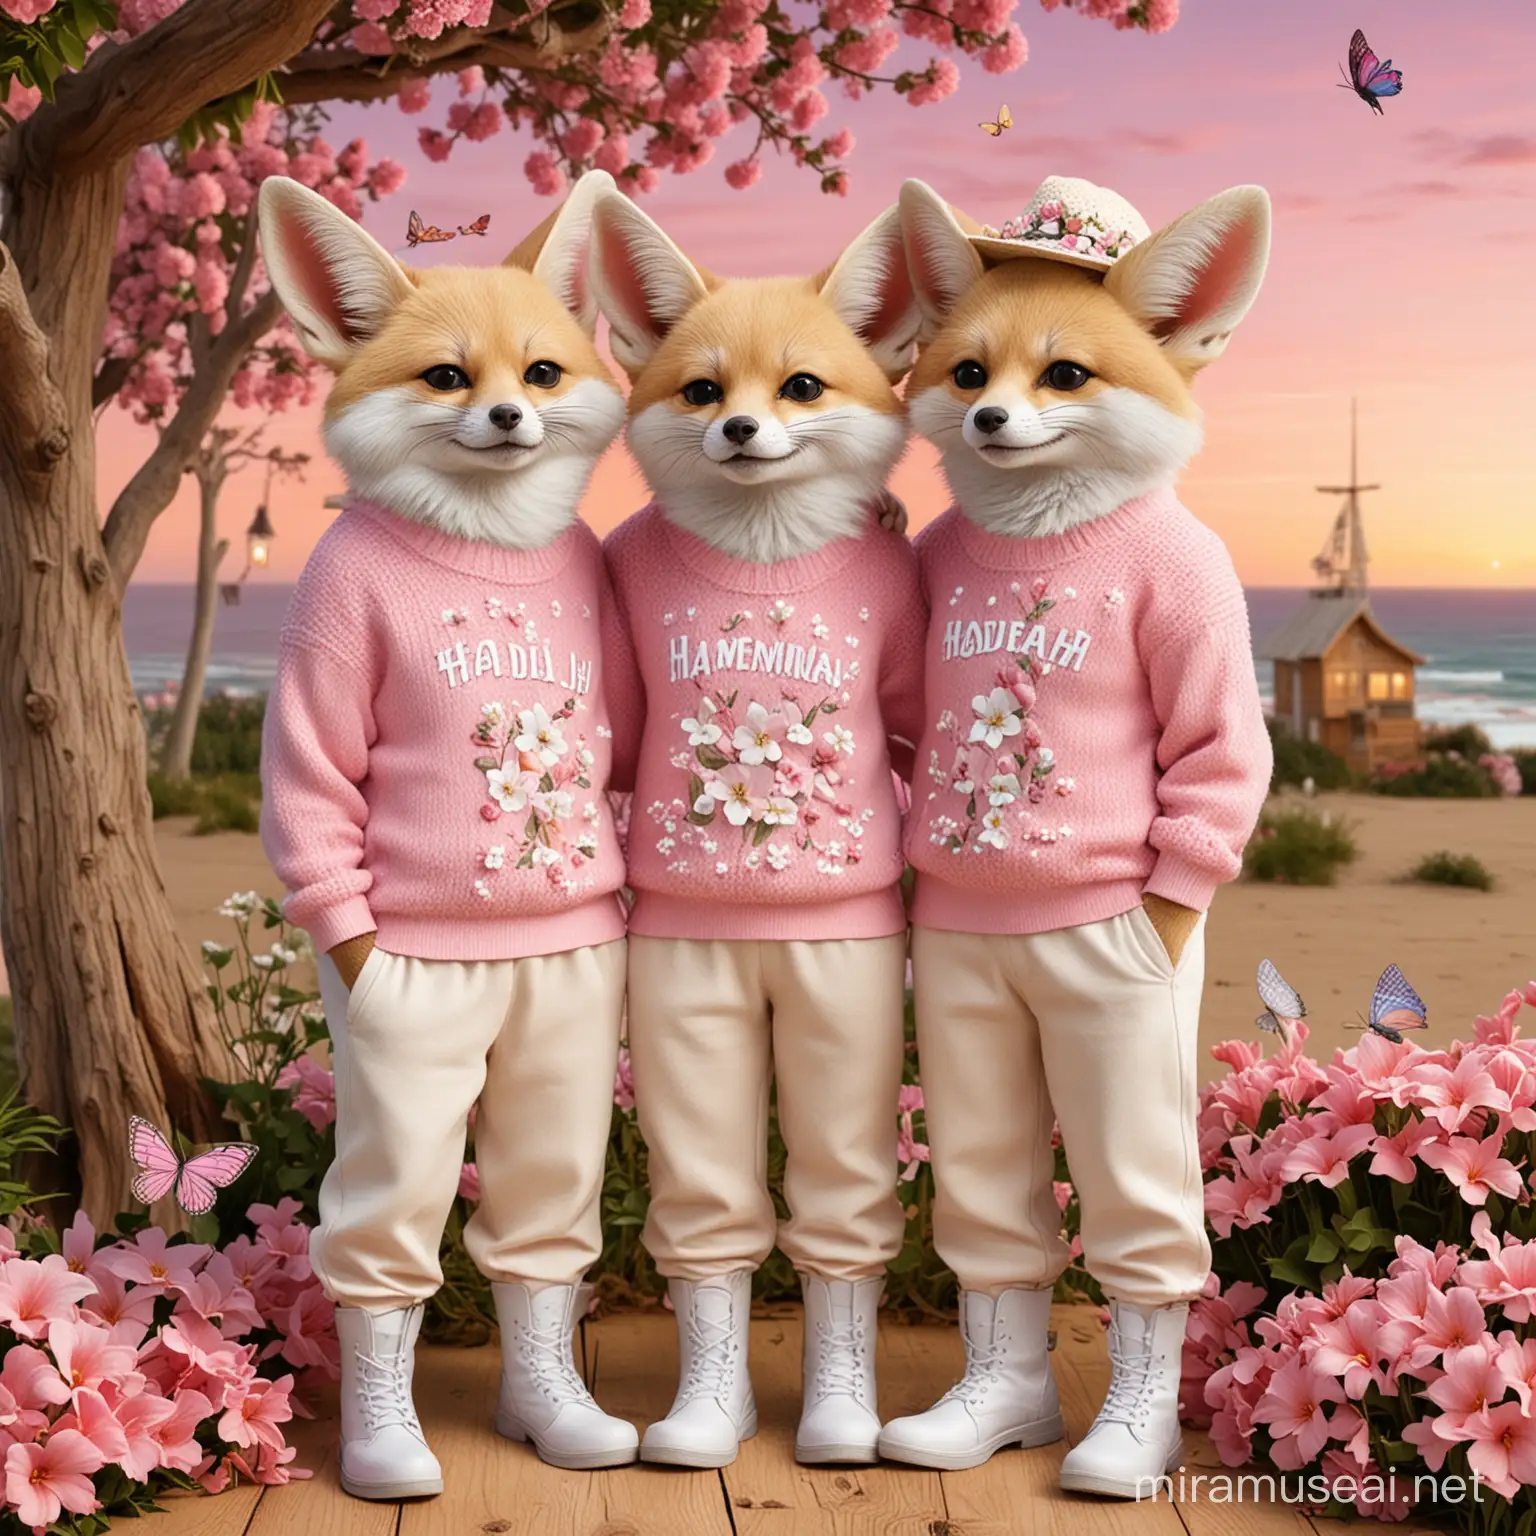 Three realistic Fennec foxes wearing pink sweaters with the name 'Hadijah', long pants, and white boots, standing and embracing each other, with a lush wooden background, some flowers around the tree, some butterflies around the flowers, and beach hats on all their heads, smiling latar belakang dengan tulisan "Selamat Malam"